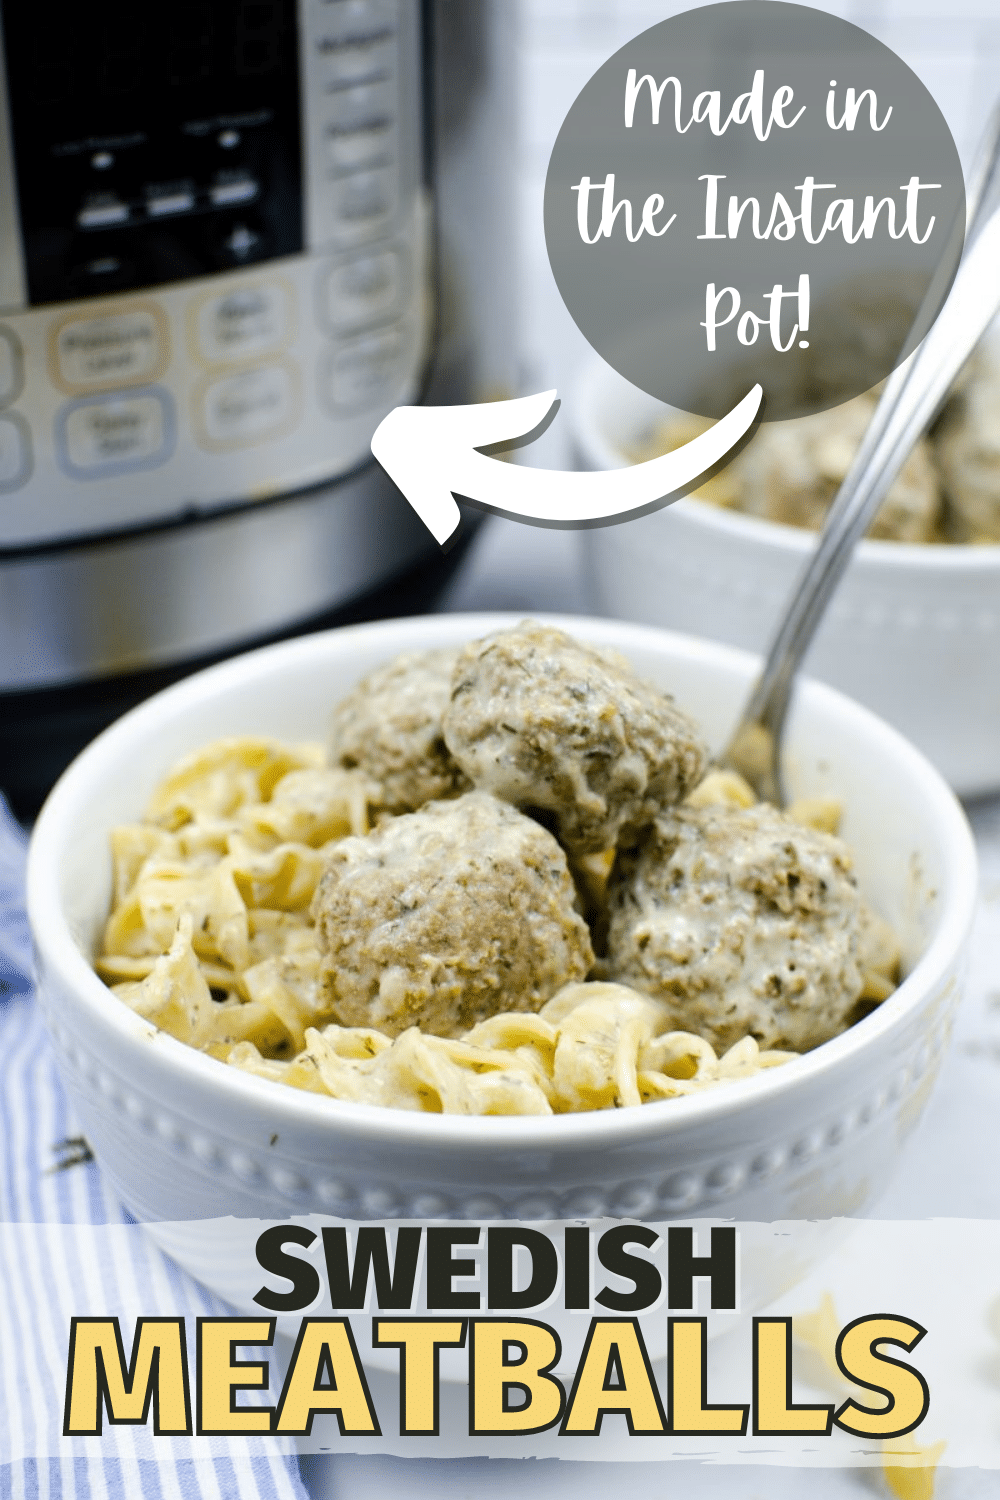 These tender turkey meat instant pot Swedish meatballs are delicious and creamy. Make these flavorful meatballs at home for a classic weeknight dinner! #instantpot #swedishmeatballs #turkey #meatballs #dinner via @wondermomwannab